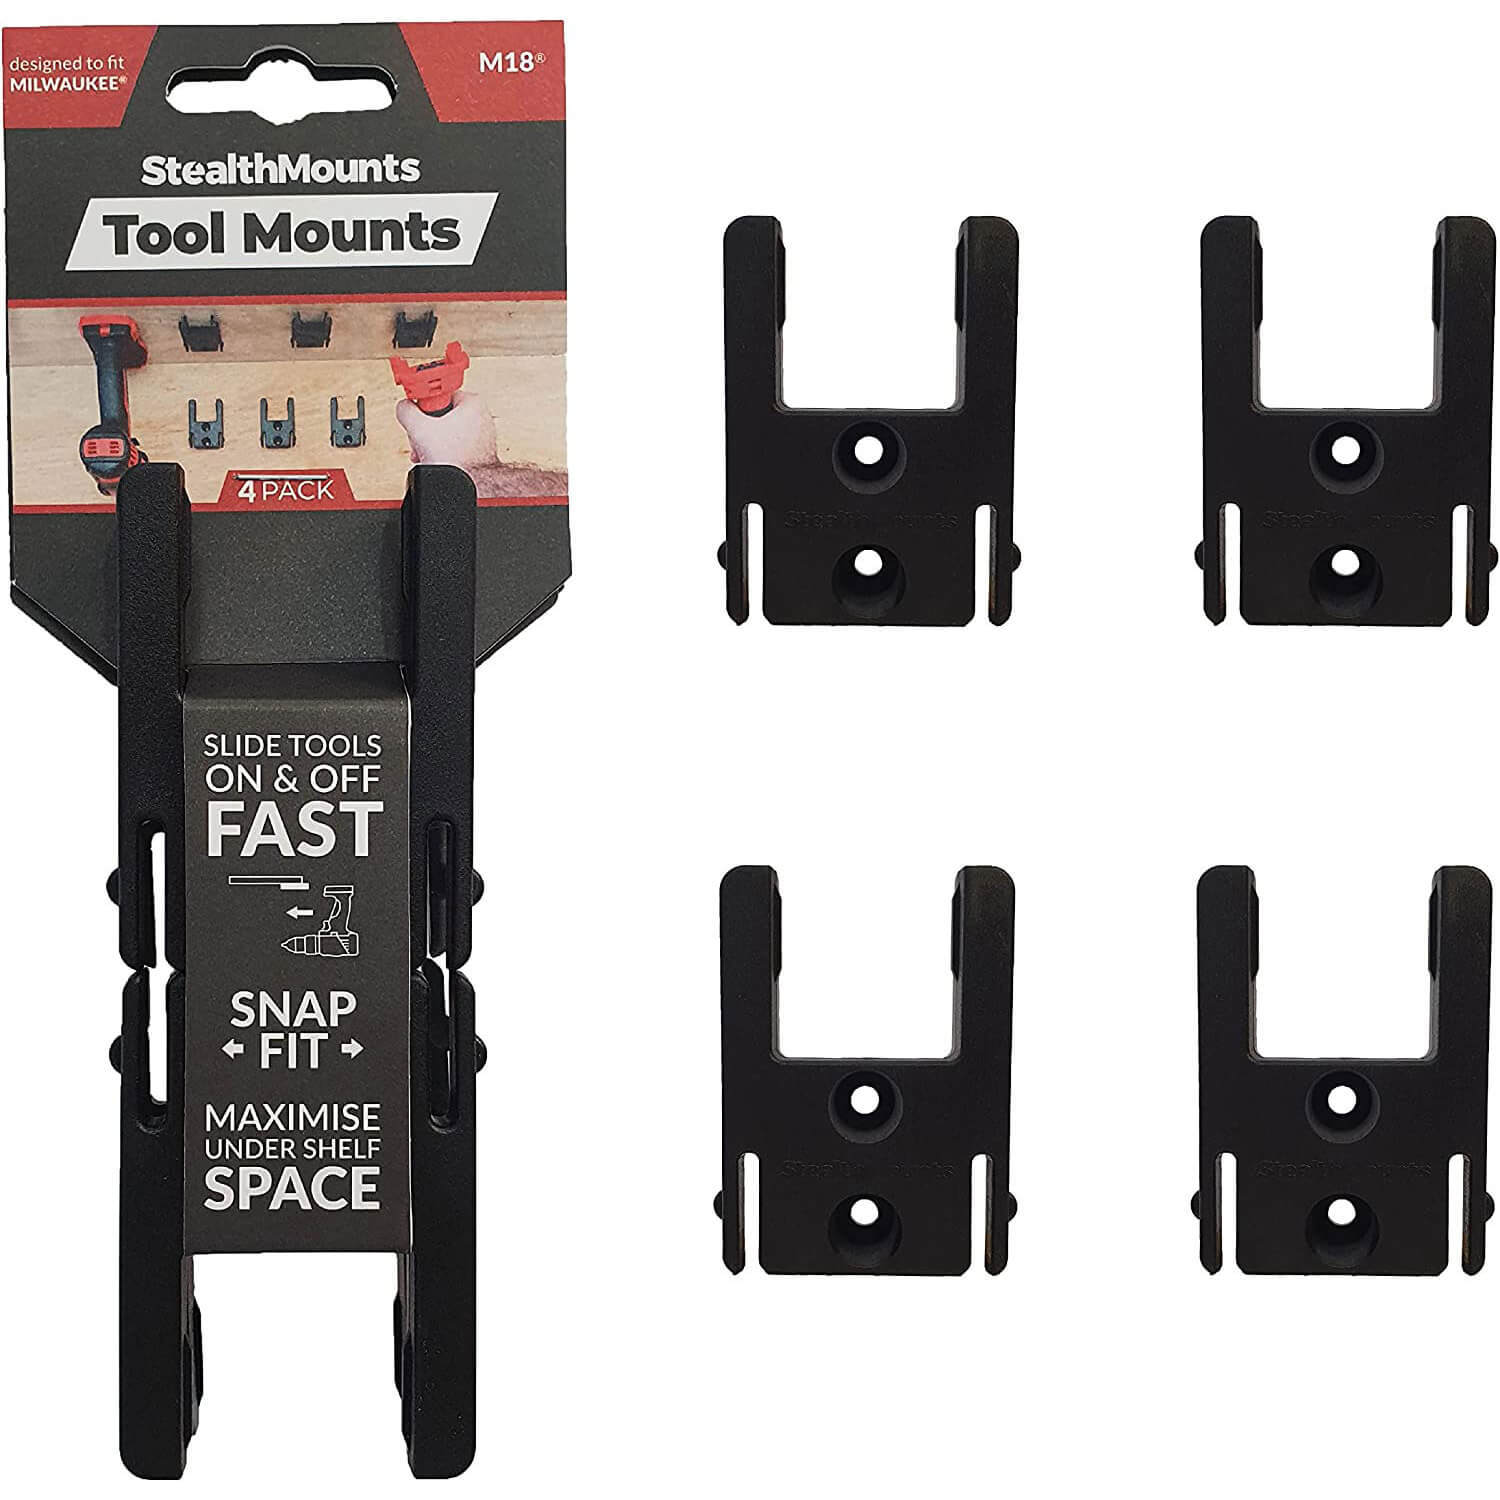 Stealth Mounts 4 Pack Tool Mounts for Milwaukee 18v M18 Tools Black